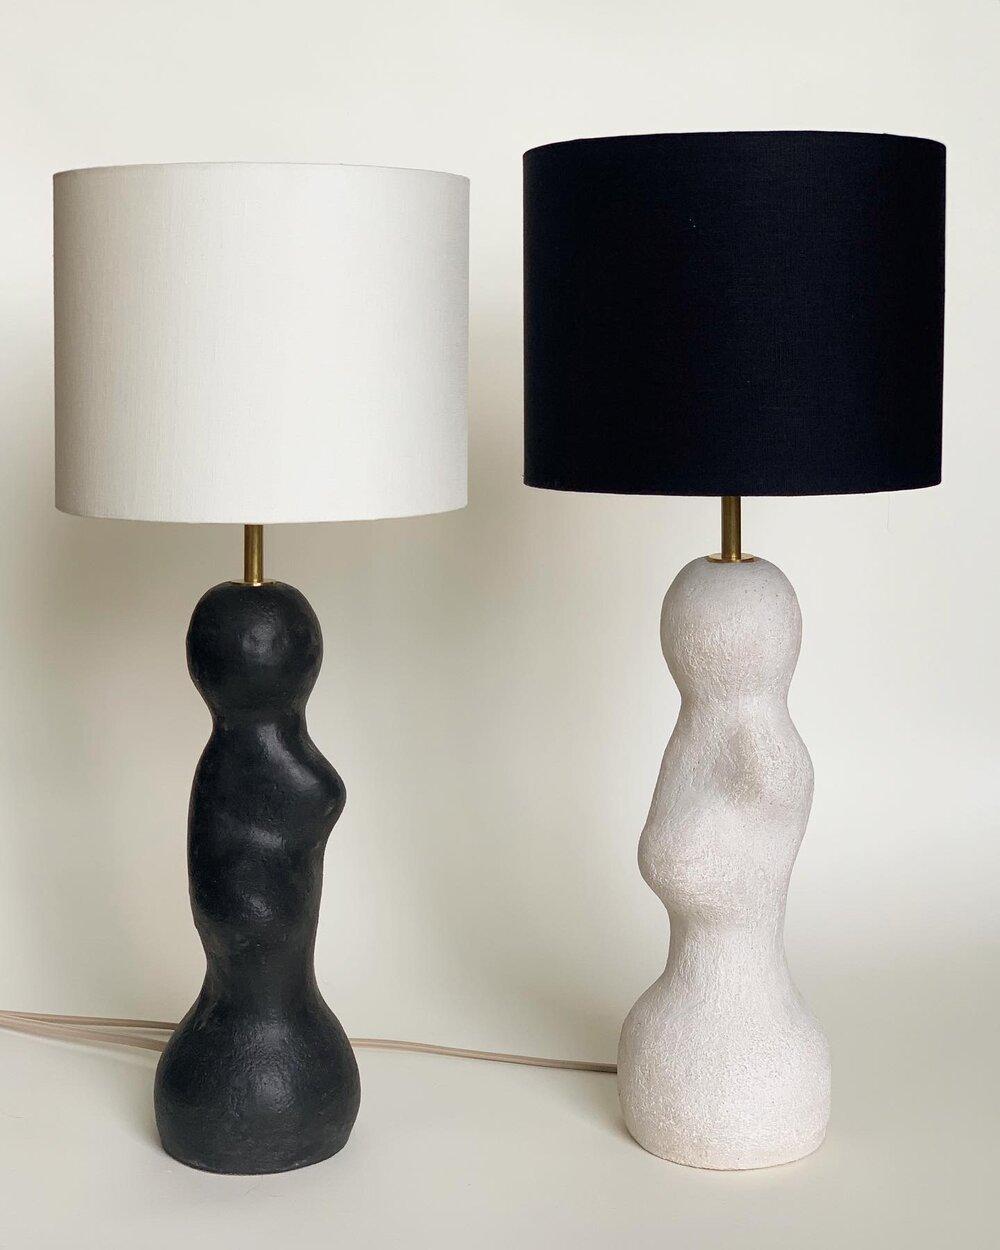 Lamp: h 14'“ x w 6”

Shade: Oyster or Black Linen, h 11” x w 13”

Hardware: Unfinished Brass

*Shade color may be custom.


Pain for daylight lamp is hand sculpted and made to order. Please allow for slight variations between each piece, as